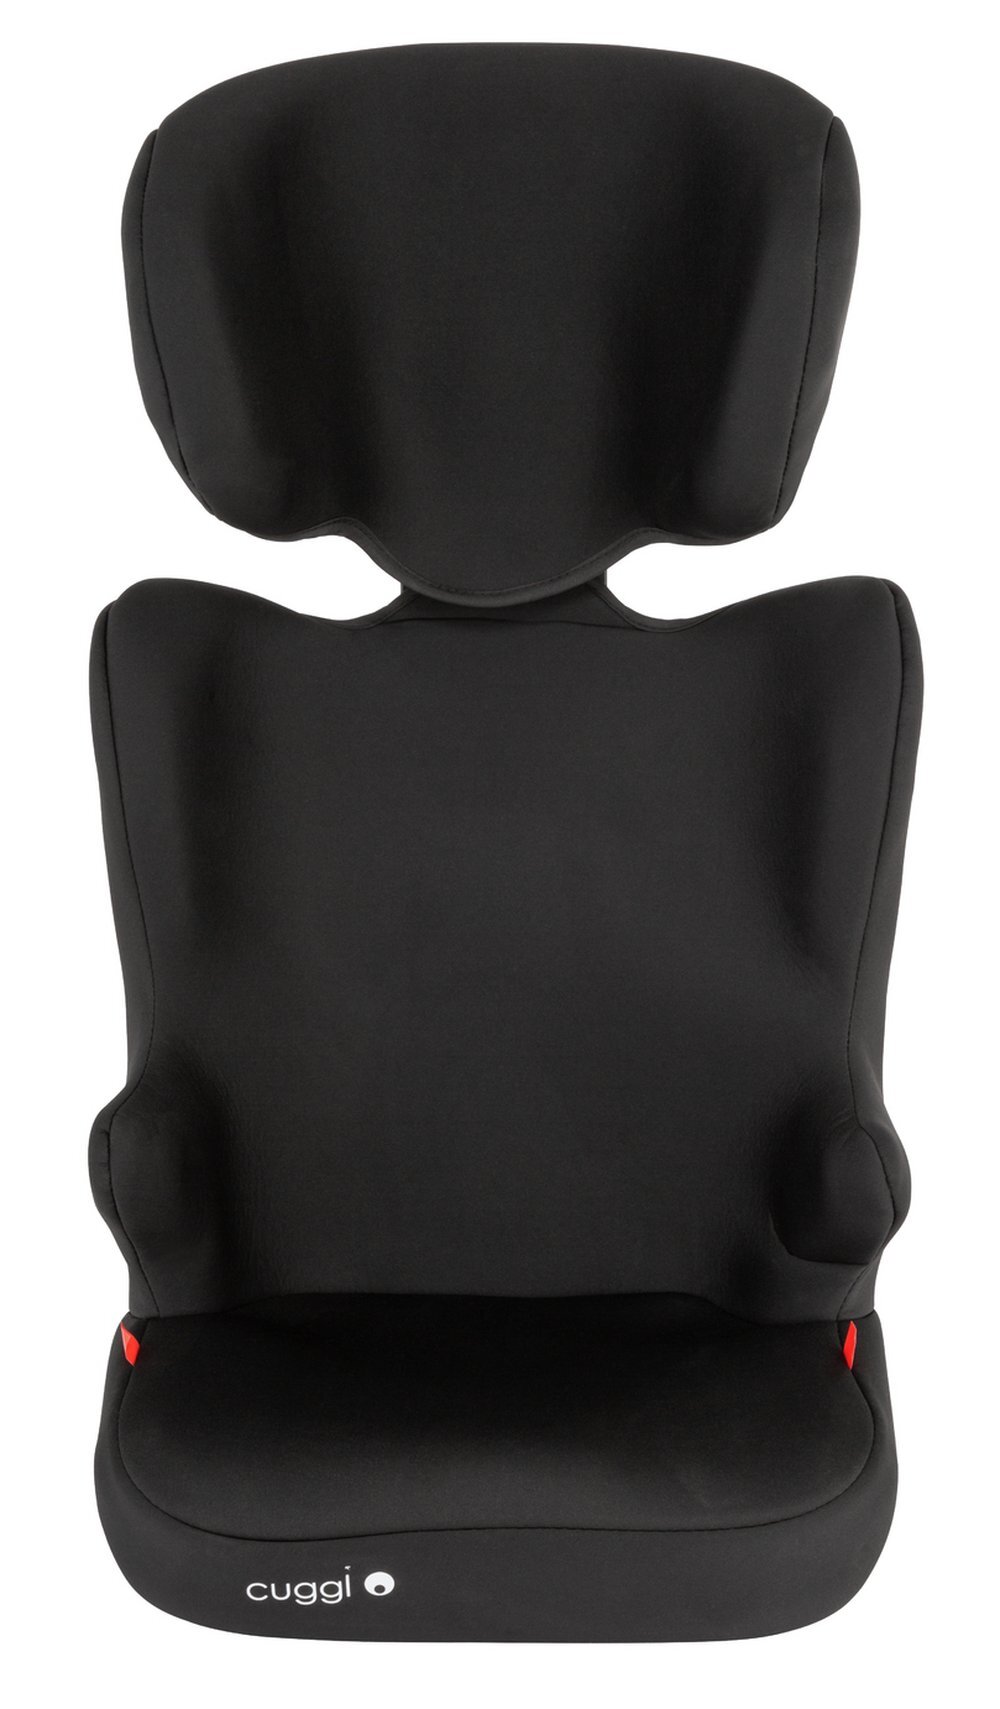 BRAND NEW CUGGL SWALLOW GROUP 2/3 BABY CAR SEAT 18PCS £9.99each